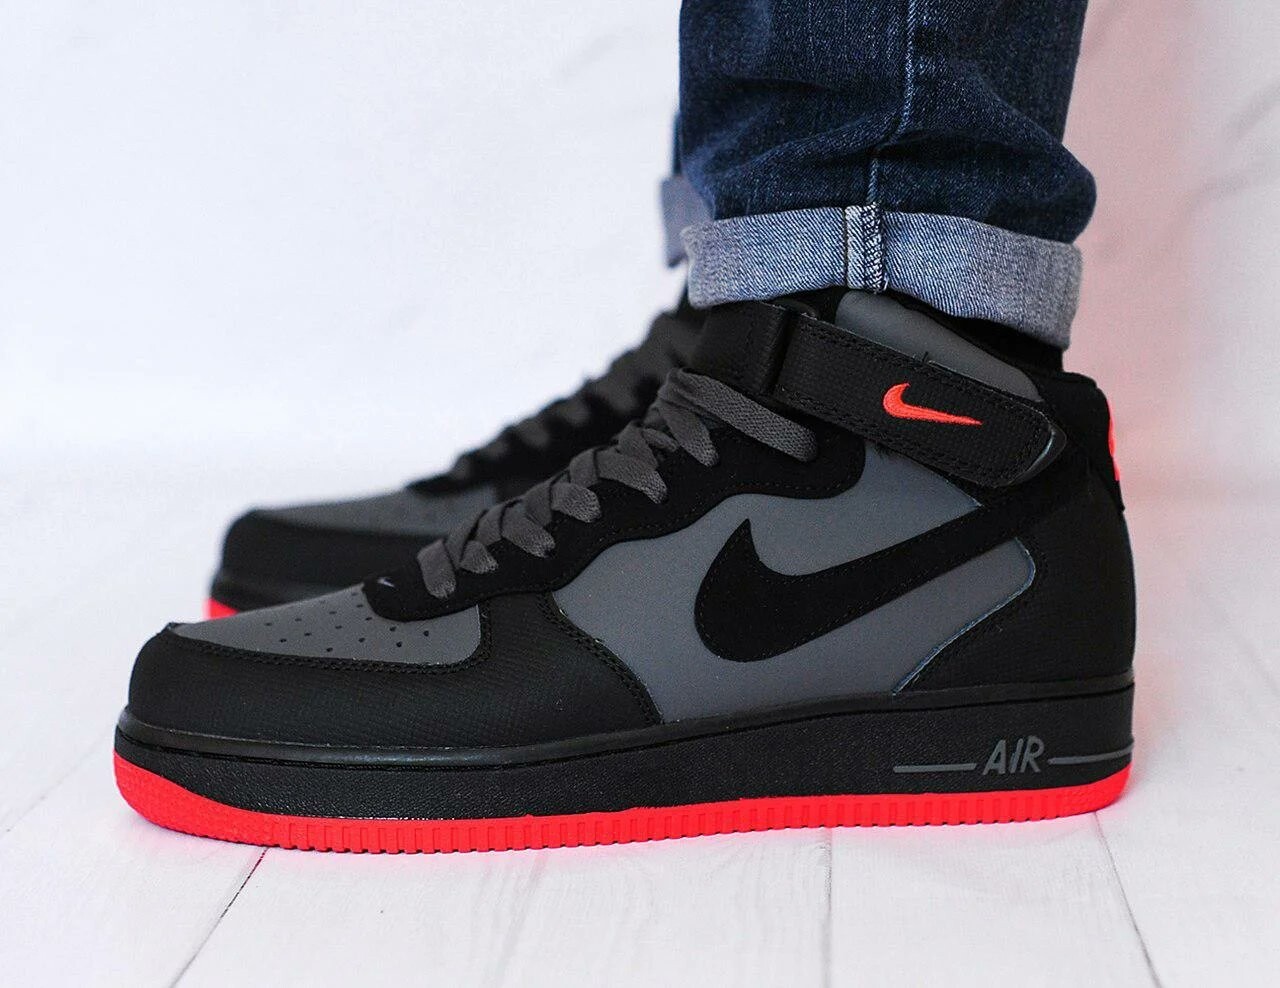 Nike Air Force 1 Mid 07 “Hot Lava”